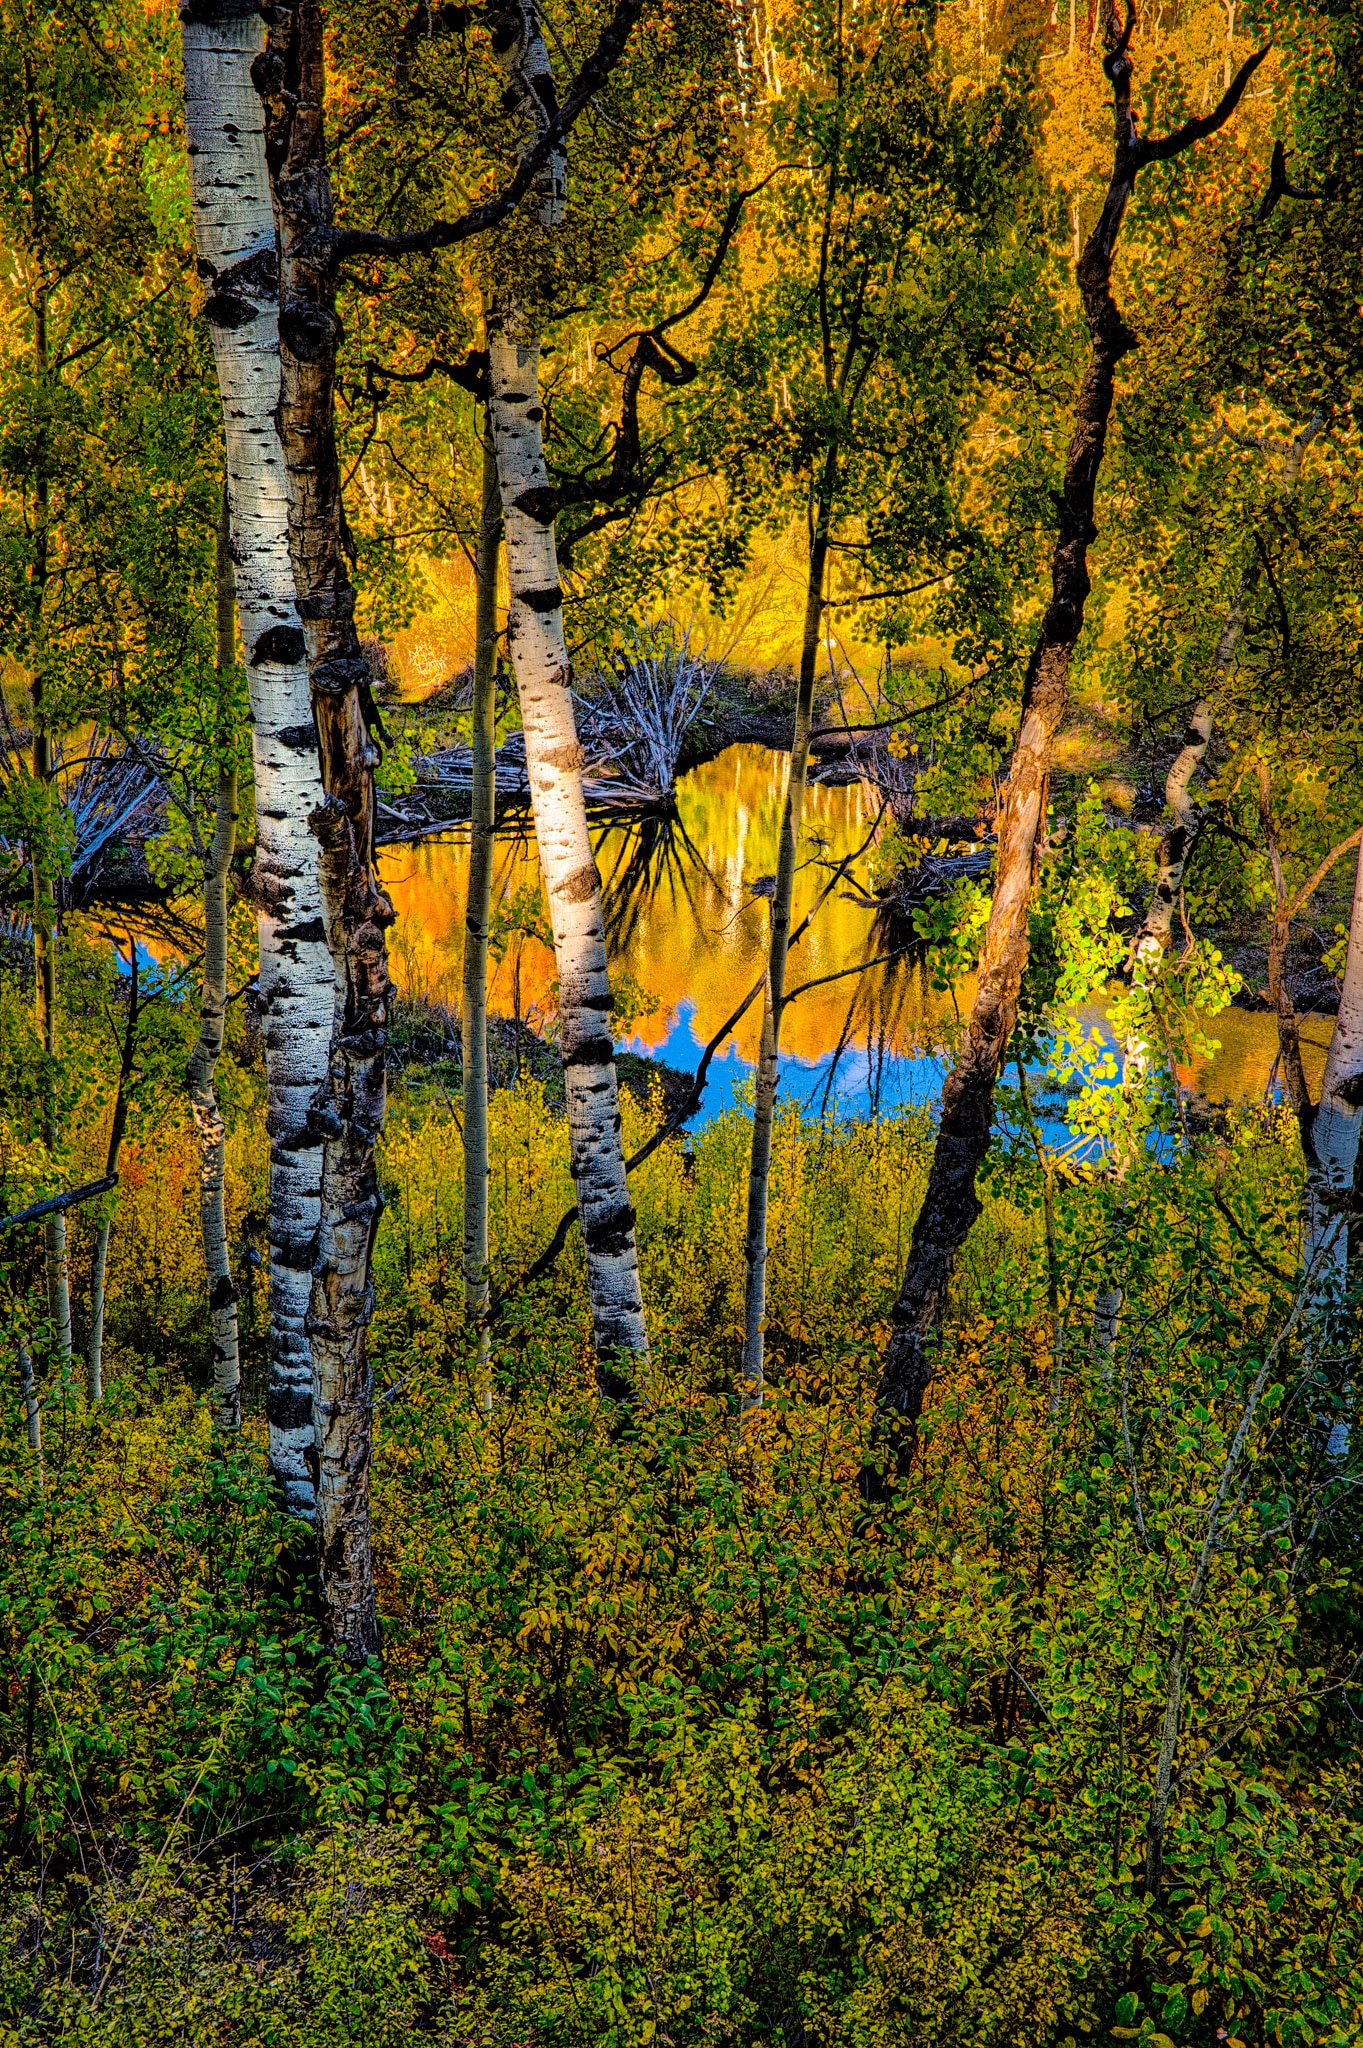 Yellow aspens are reflected in a pond as sunlight illuminates aspen boles in the foreground, on Last Dollar Road near Ridgway, Colorado.